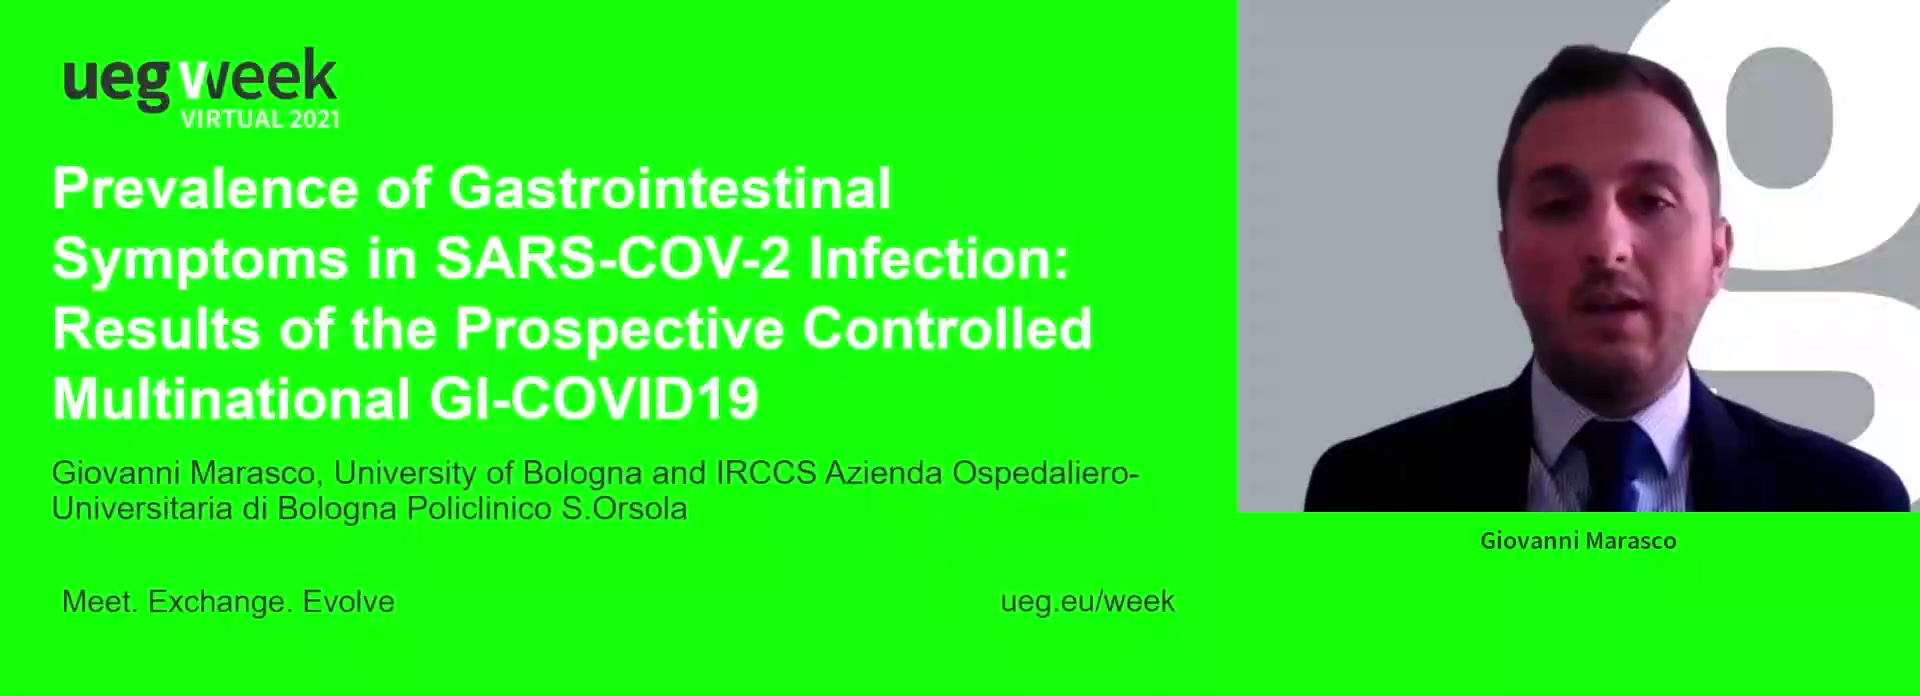 PREVALENCE OF GASTROINTESTINAL SYMPTOMS IN SARS-COV-2 INFECTION: RESULTS OF THE PROSPECTIVE CONTROLLED MULTINATIONAL GI-COVID19 STUDY